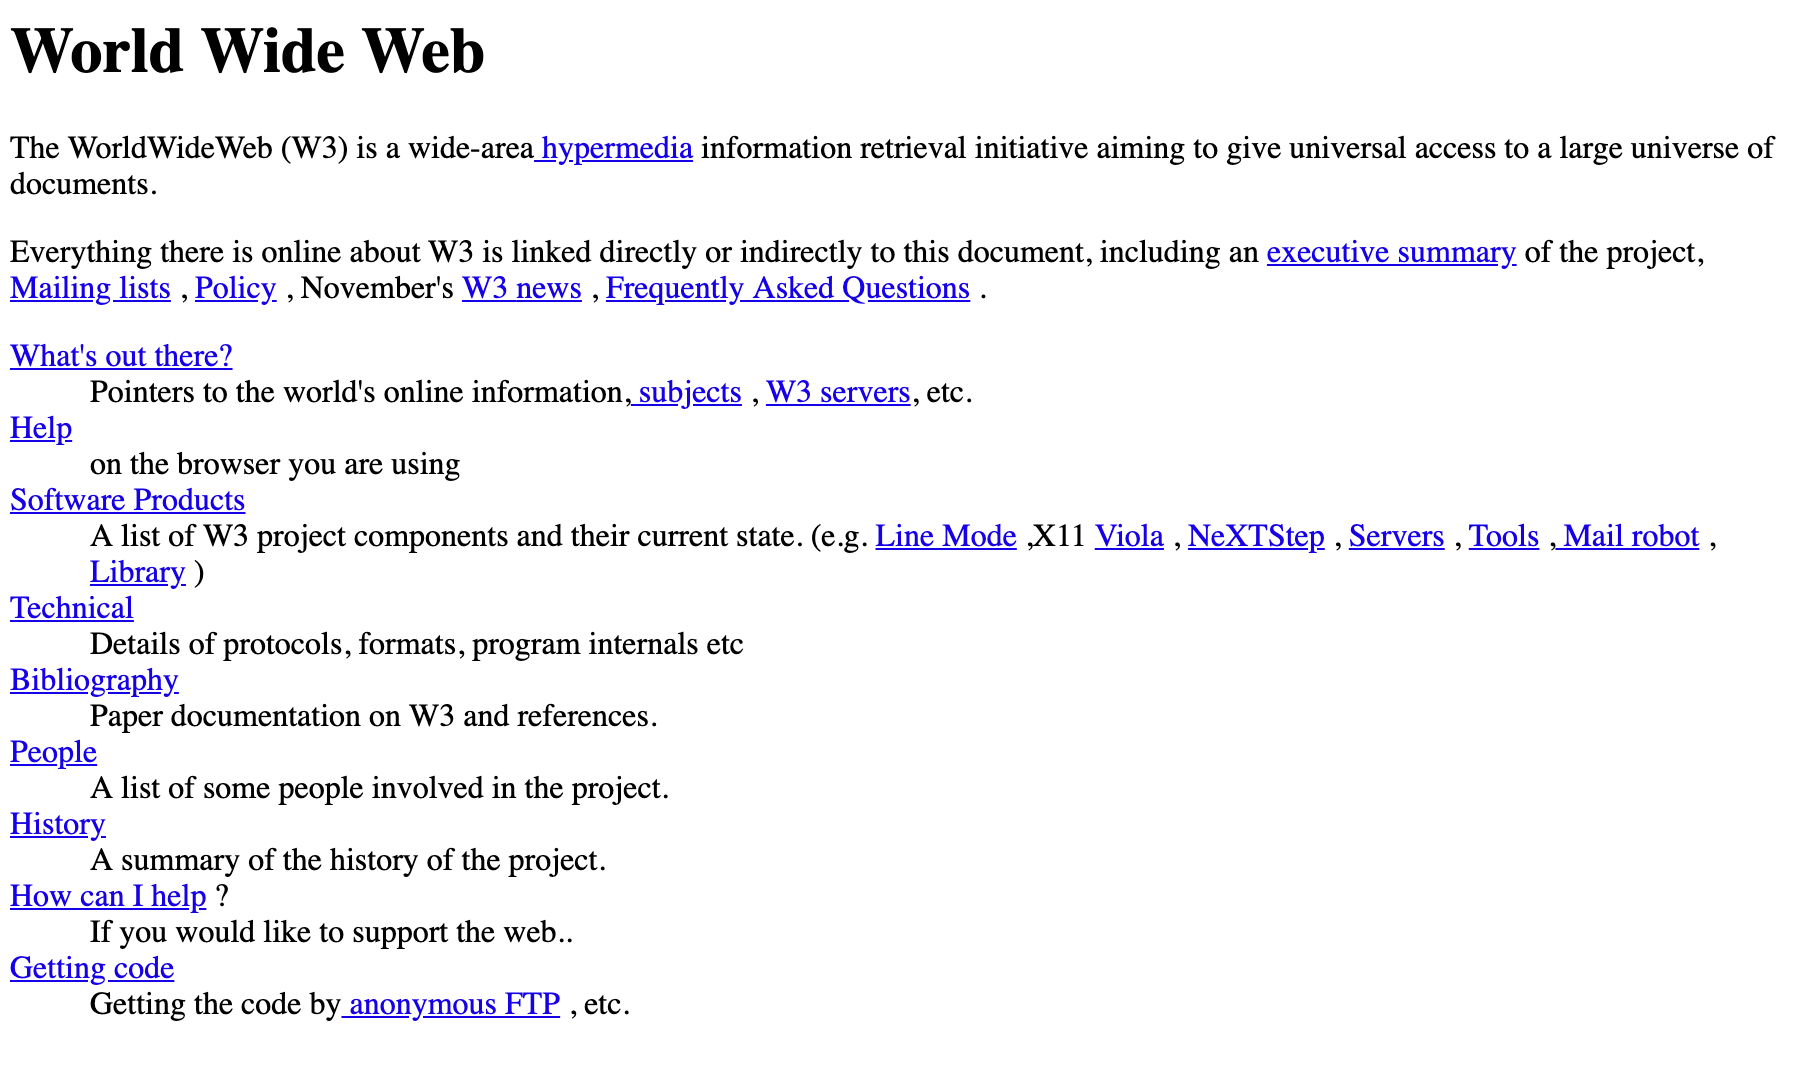 Image of the first internet website created in 1991